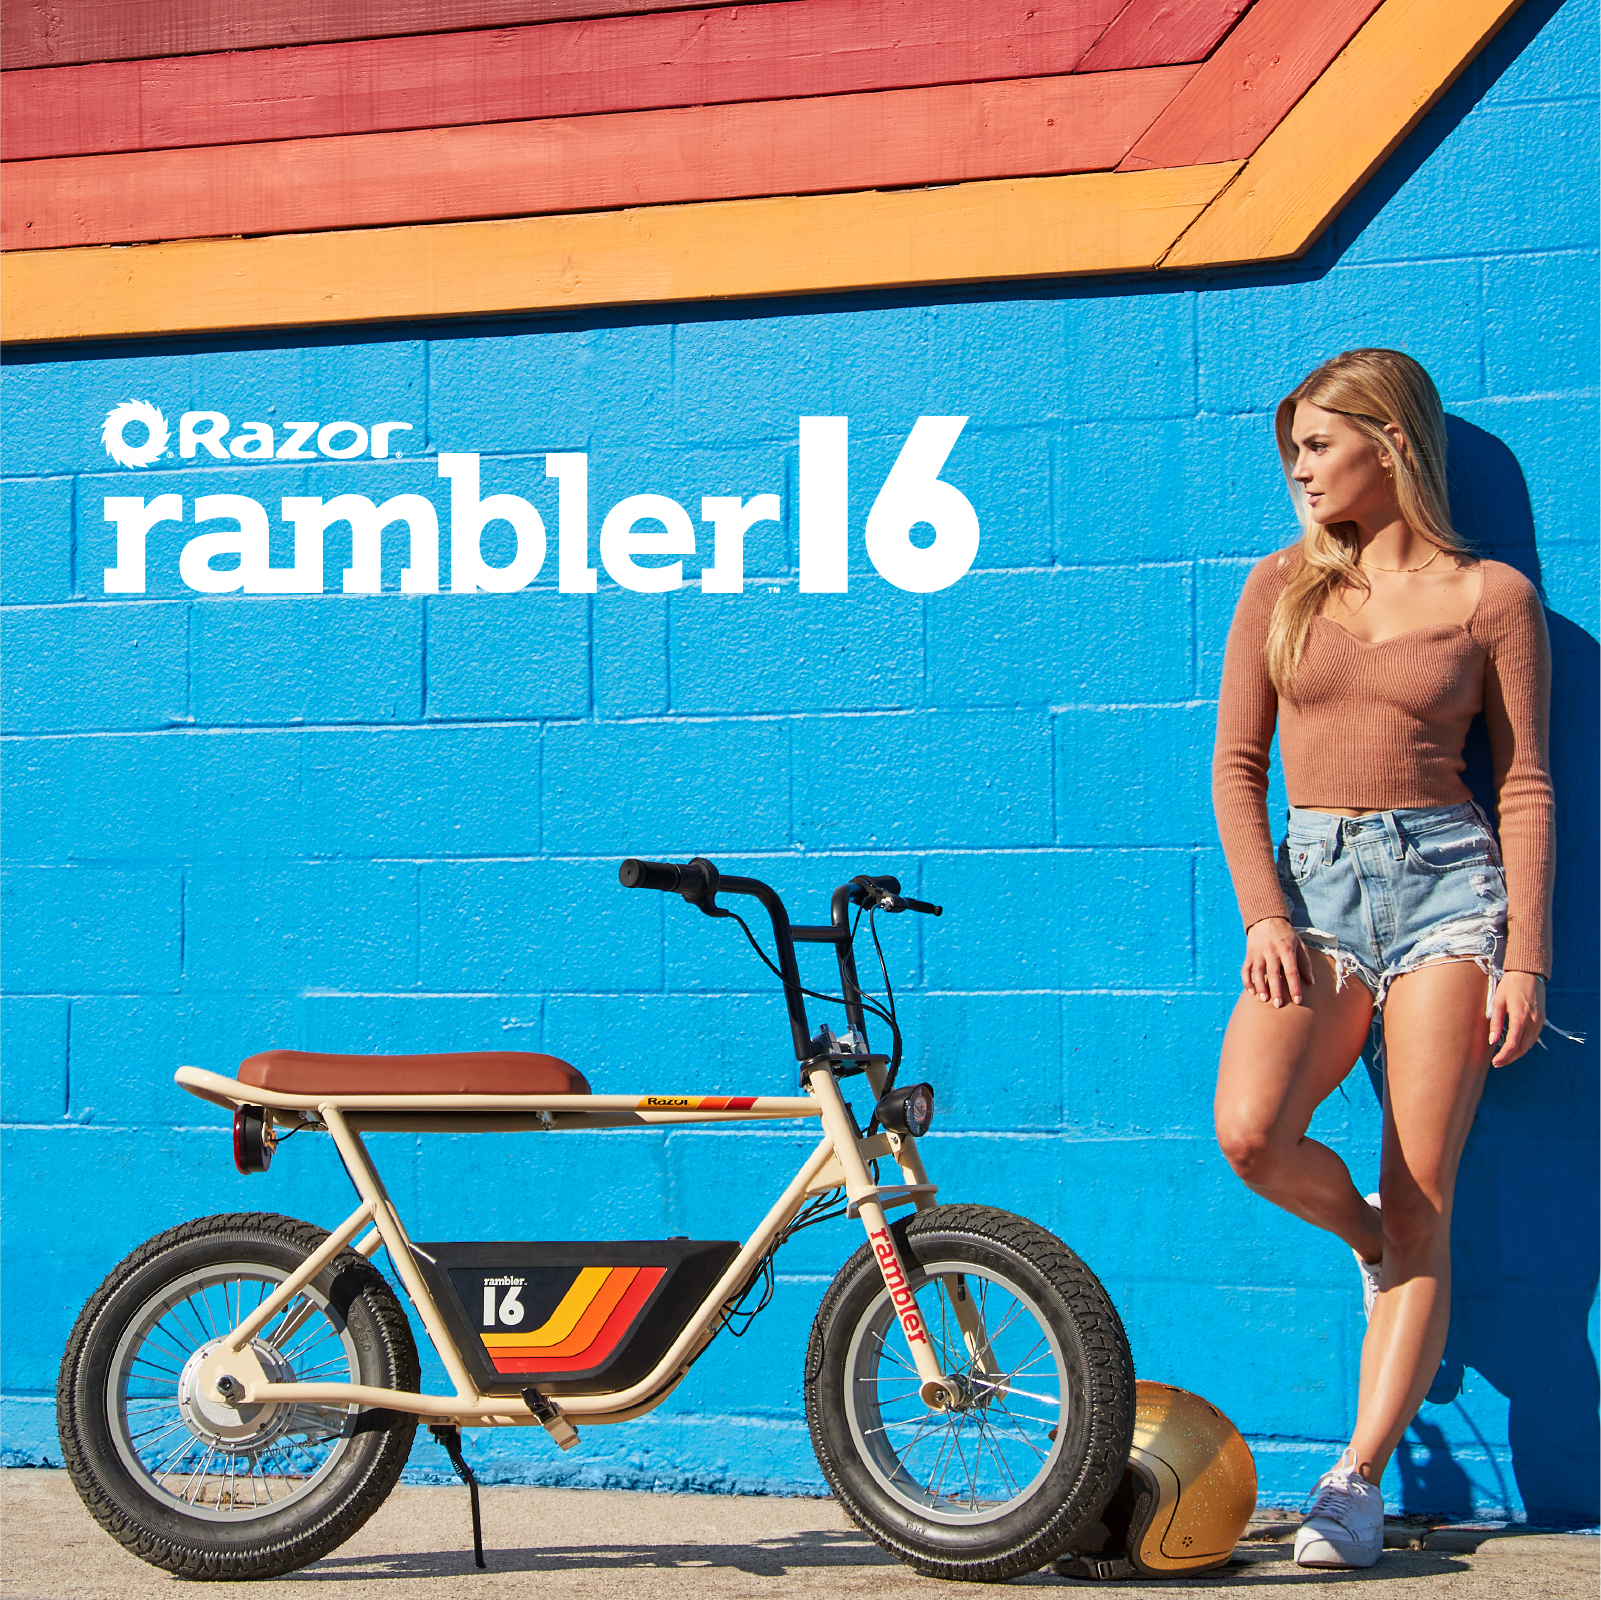 Review New Razor Rambler 16 Electric Scooter #RazorRambler16 #Razor  #Rambler16 #EBike #ElectricBike 